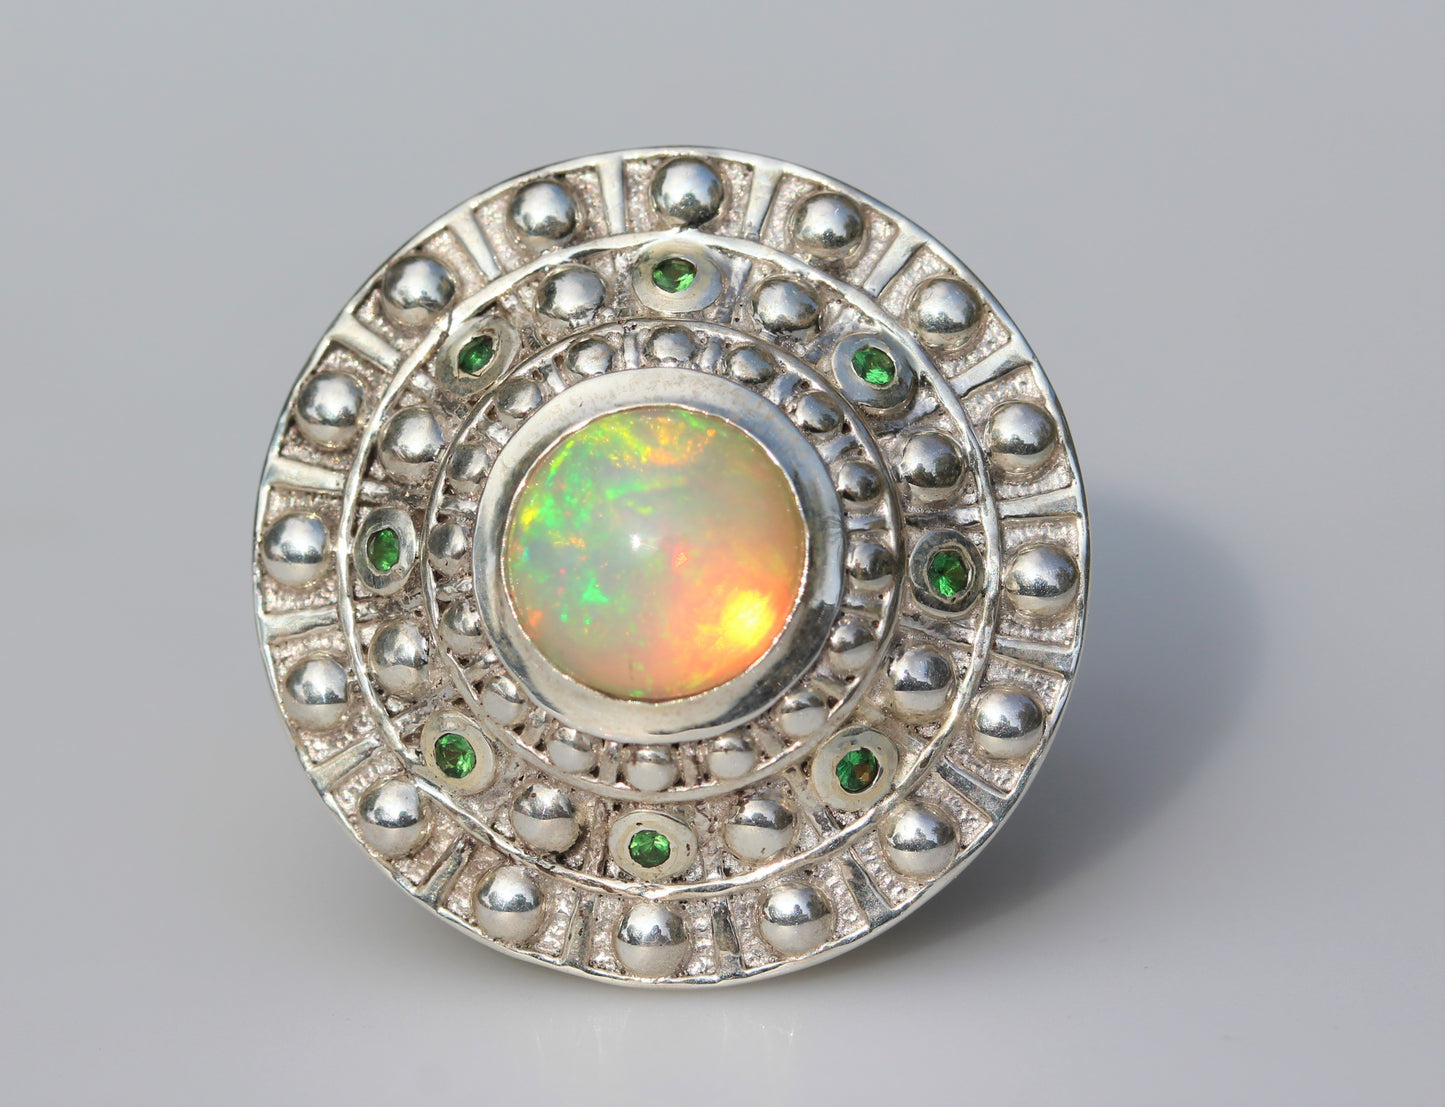 Natural Opal Ring - Sterling Silver - Adjustable Size  - #268